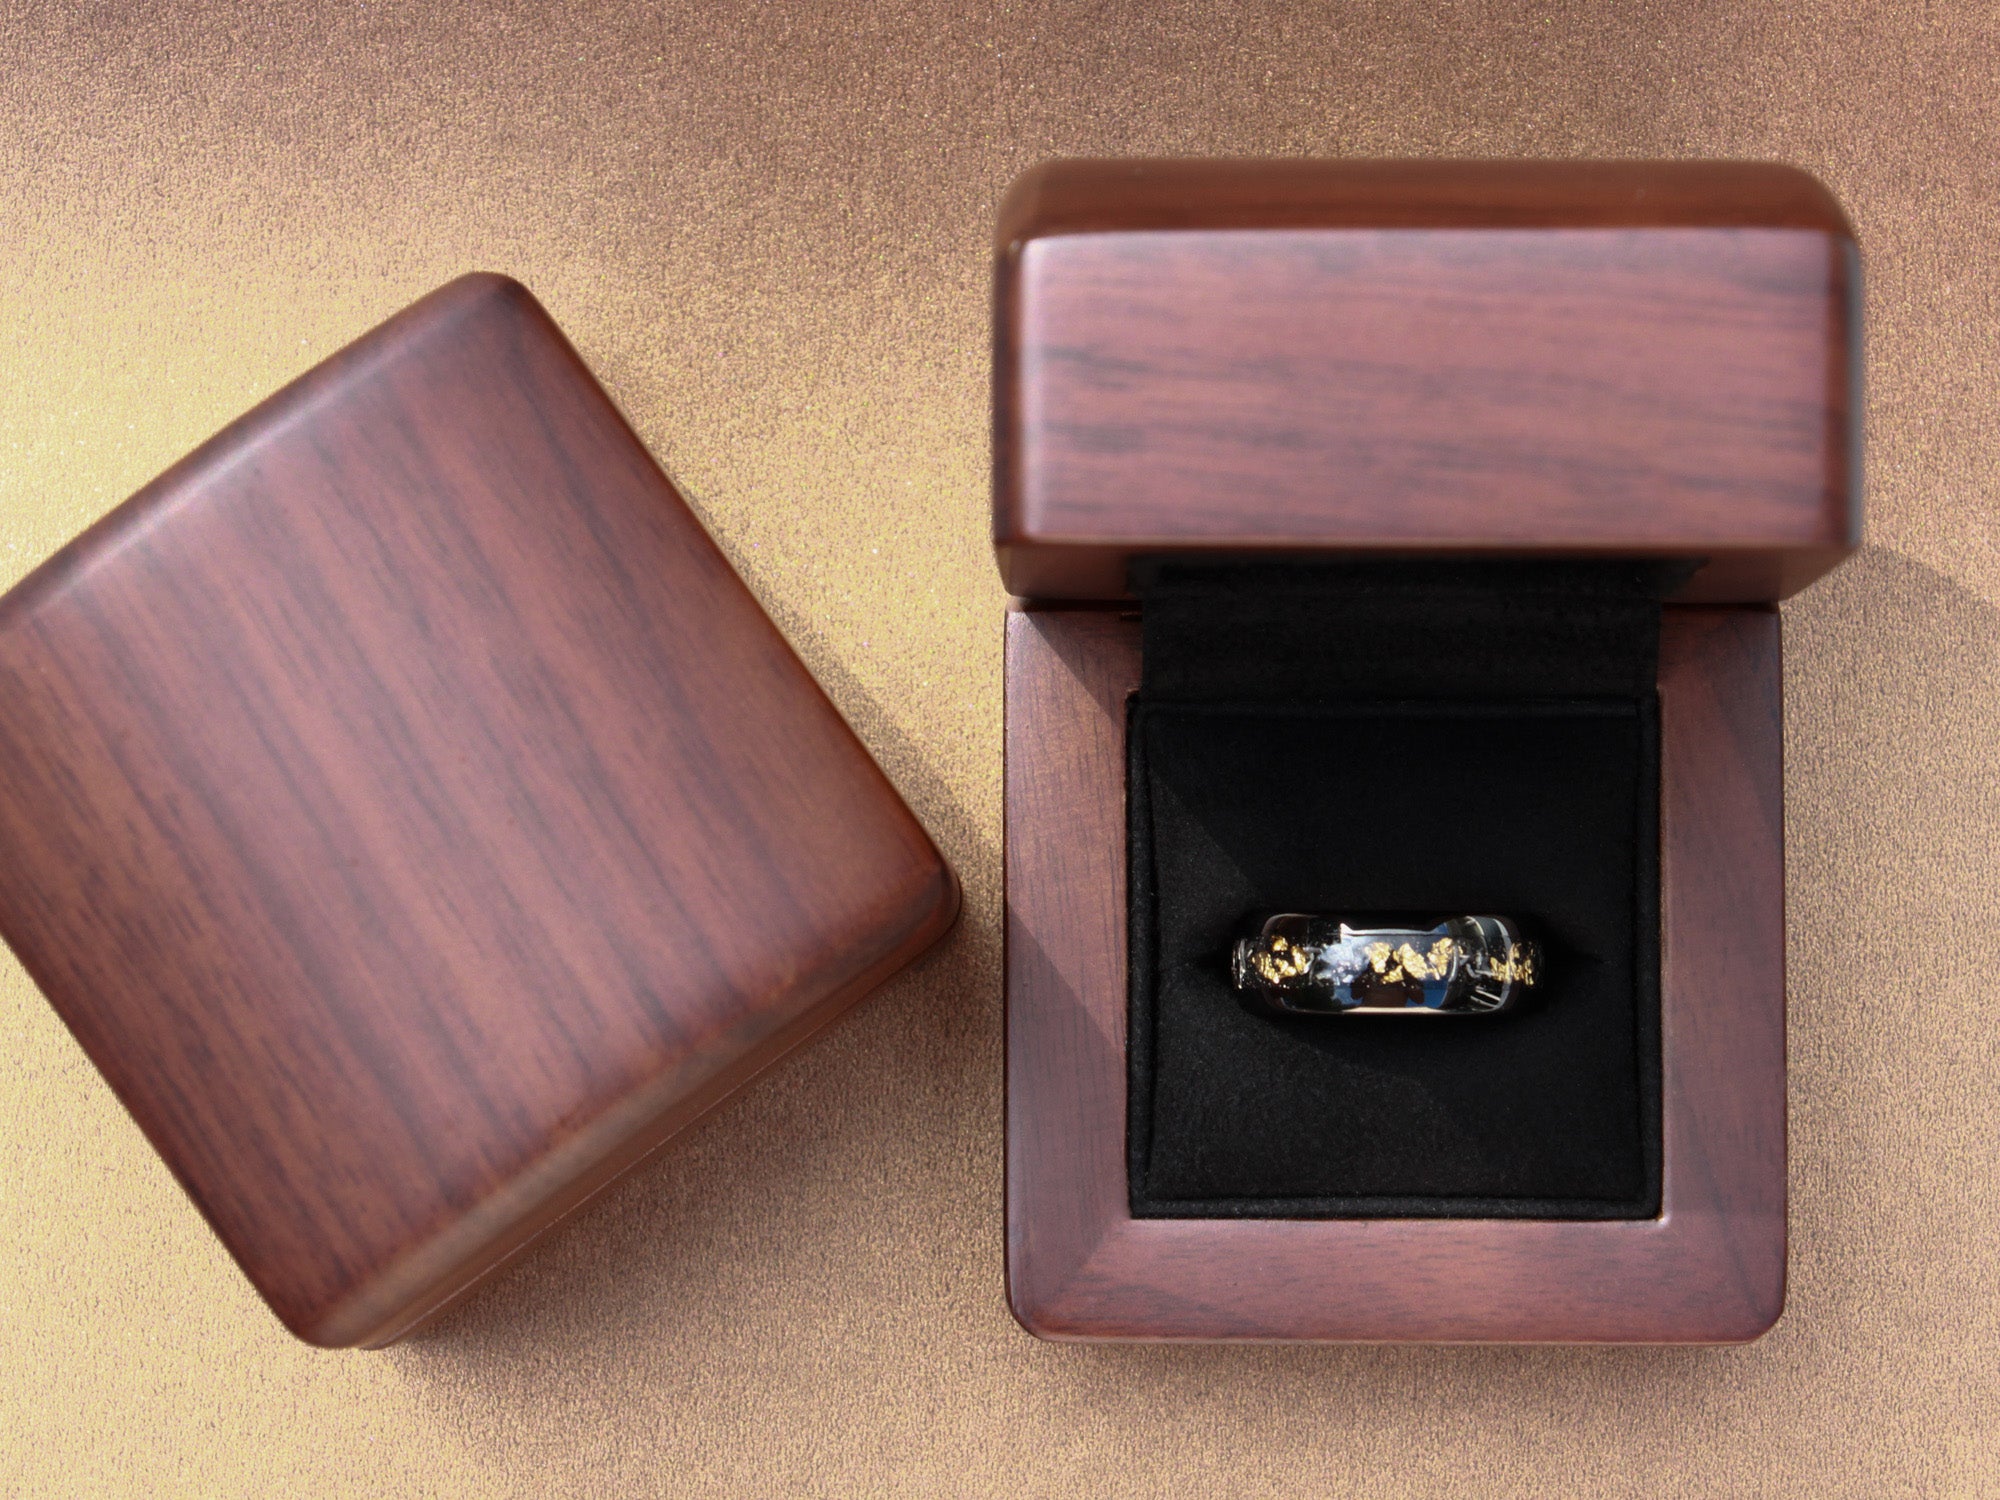 gold leaf tungsten ring, black polished ring with gold leaf and meteorite metal inlay, unique mens wedding ring, walnut wood box